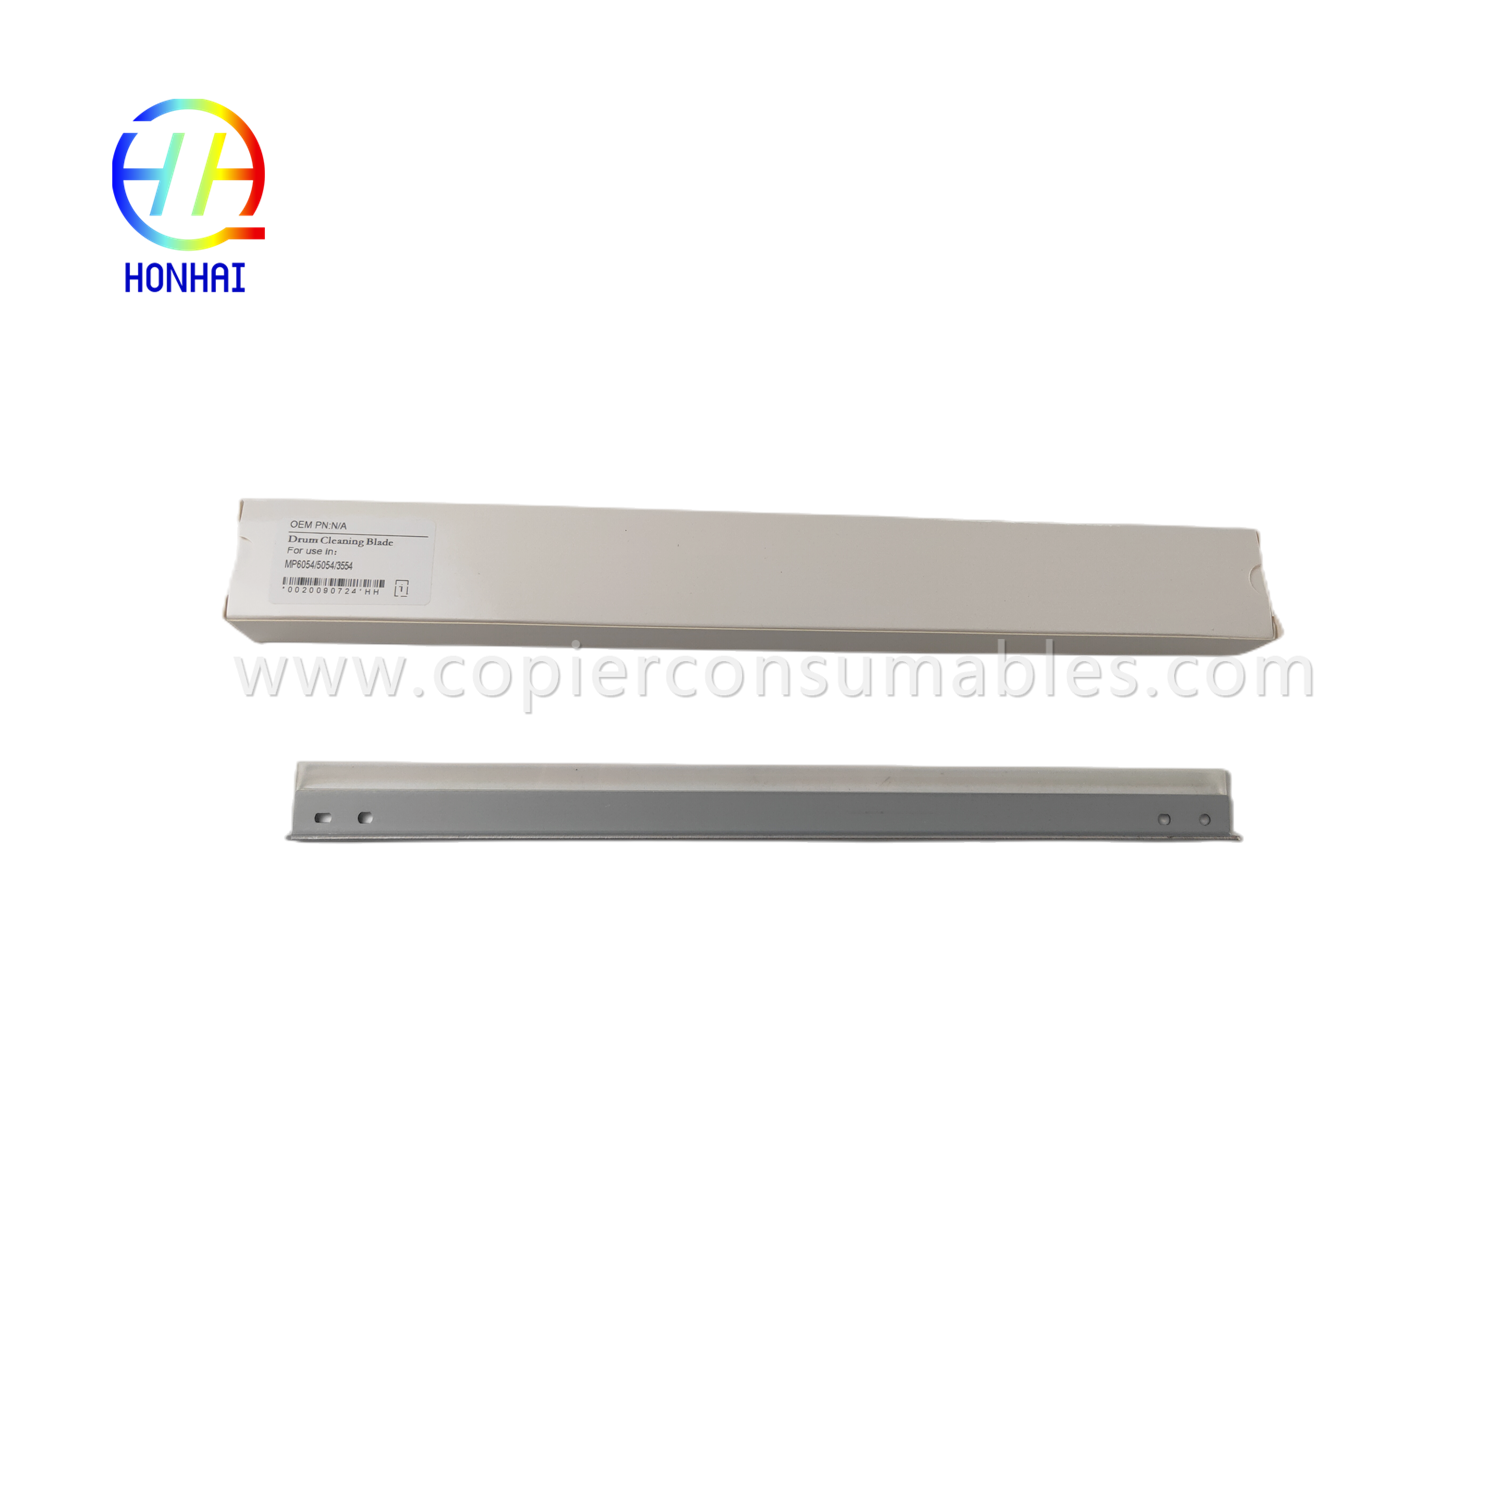 https://c585.goodao.net/drum-cleaning-blade-for-ricoh-mp-2554-3054-3554-4054-5054-6054-product/